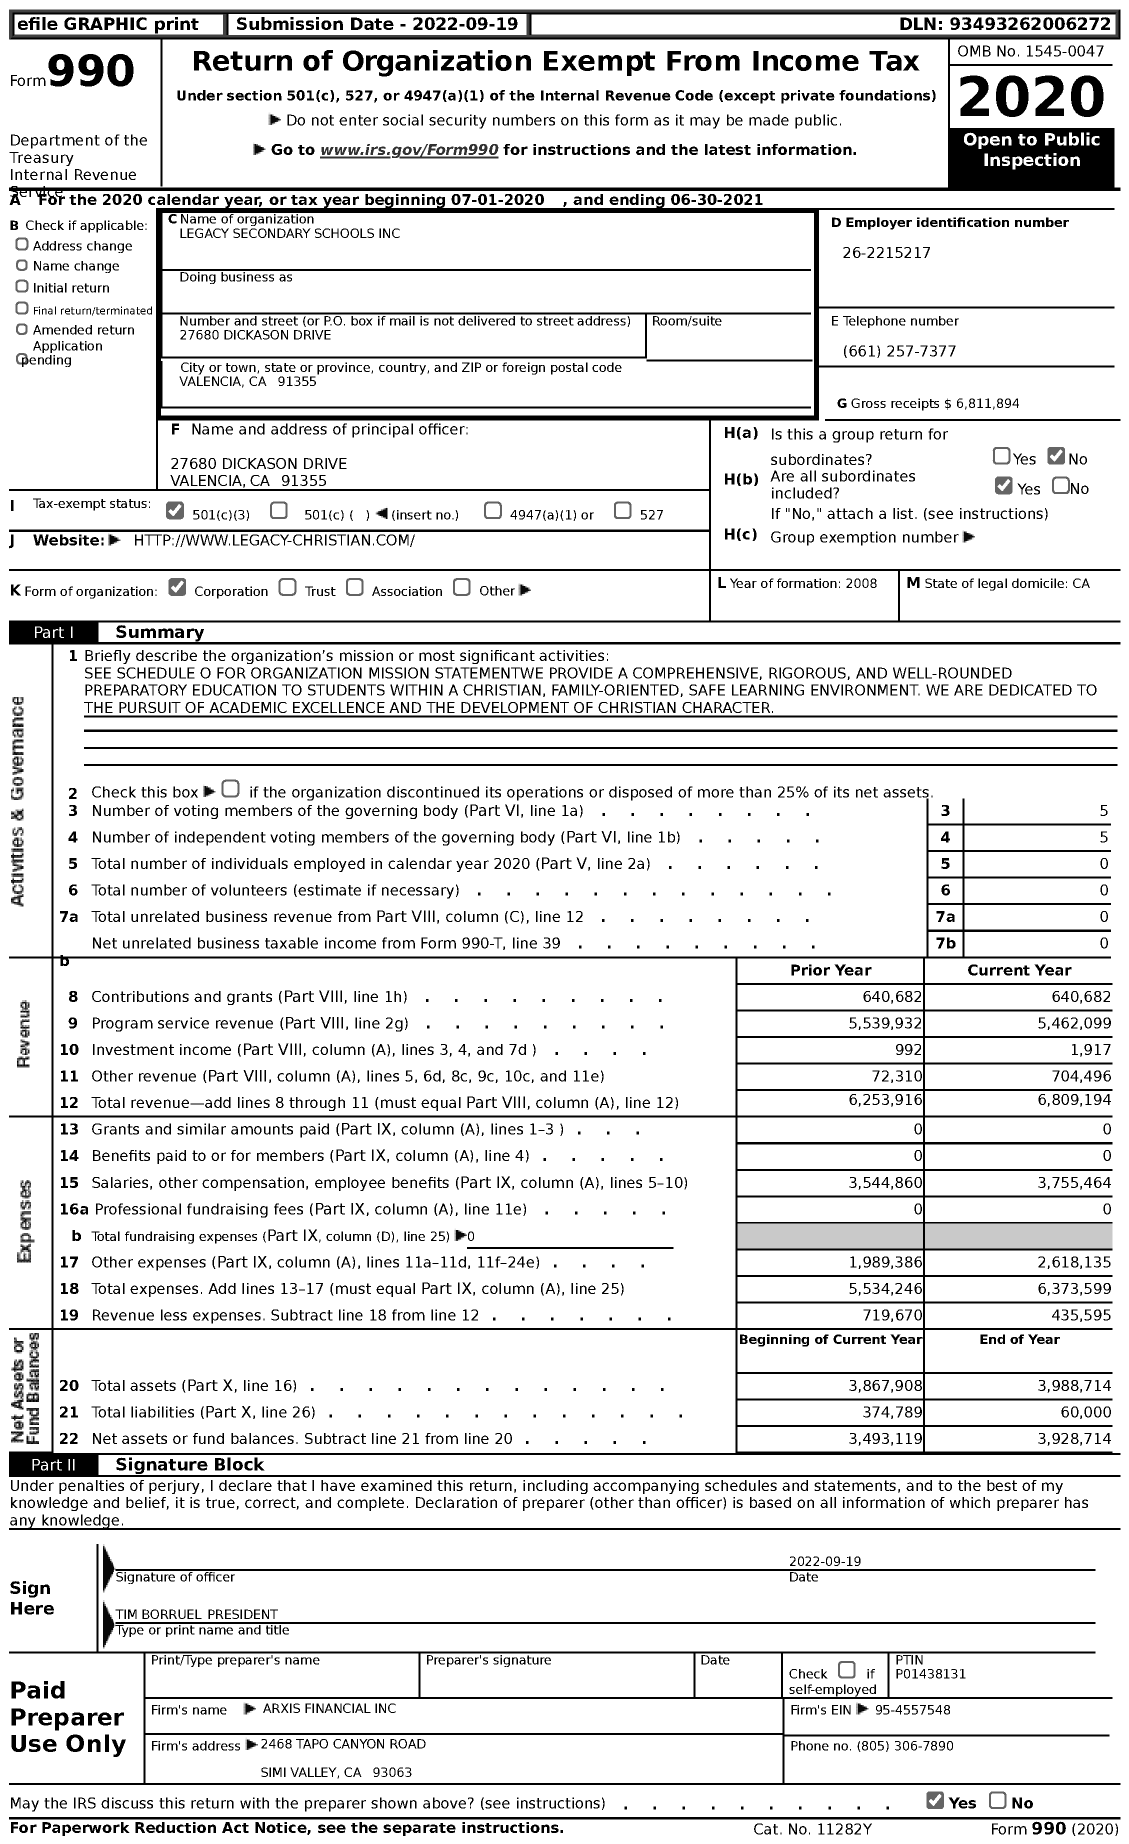 Image of first page of 2020 Form 990 for Legacy Secondary Schools